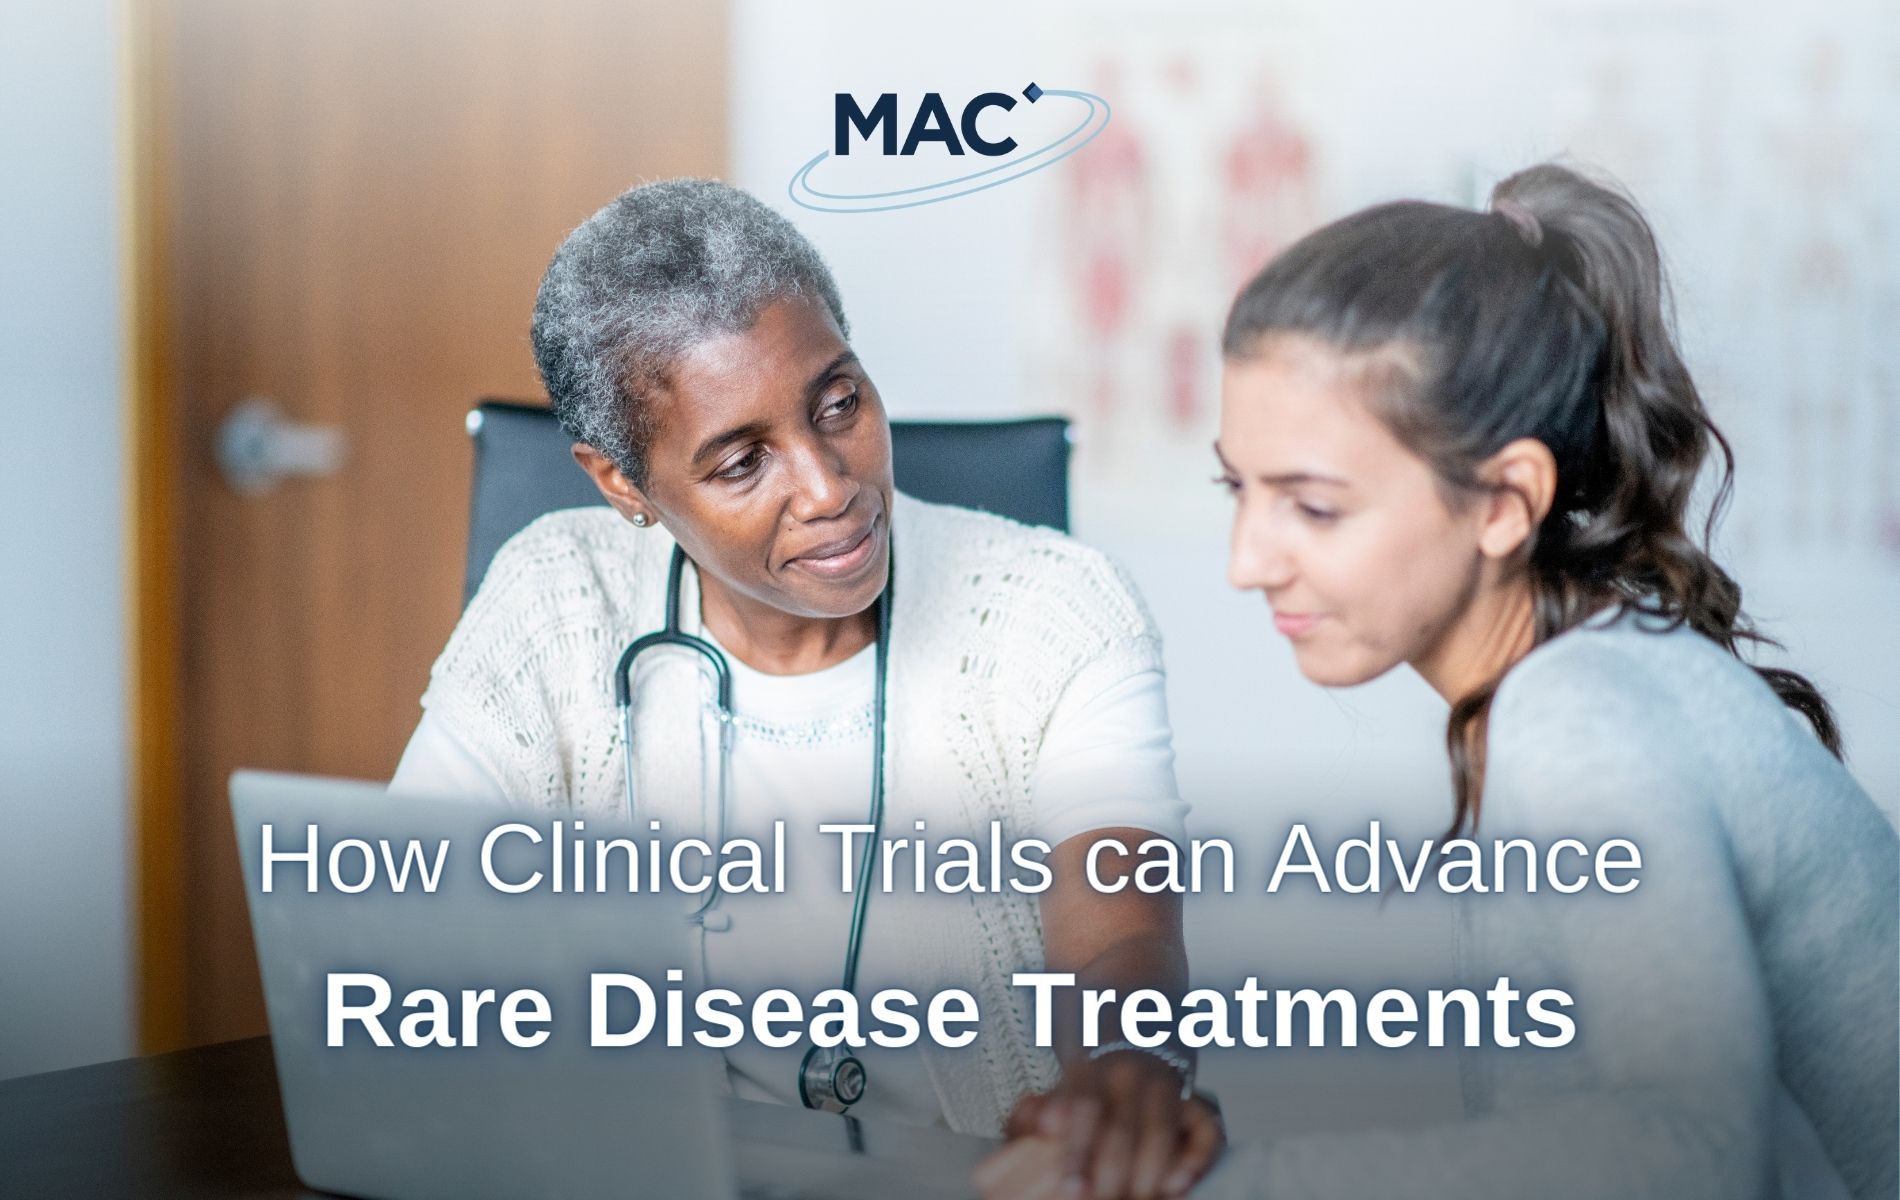 How Healthy Volunteer Clinical Trials can Advance Treatments for Rare Diseases